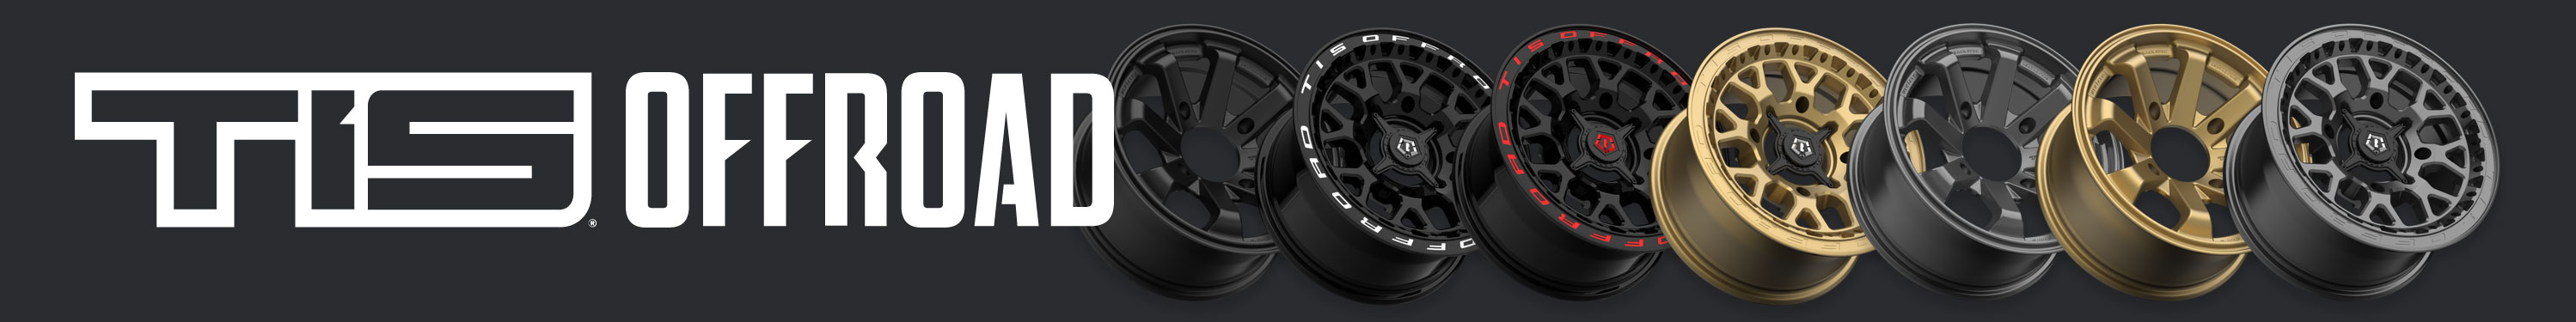 TIS Offroad Wheel Collection